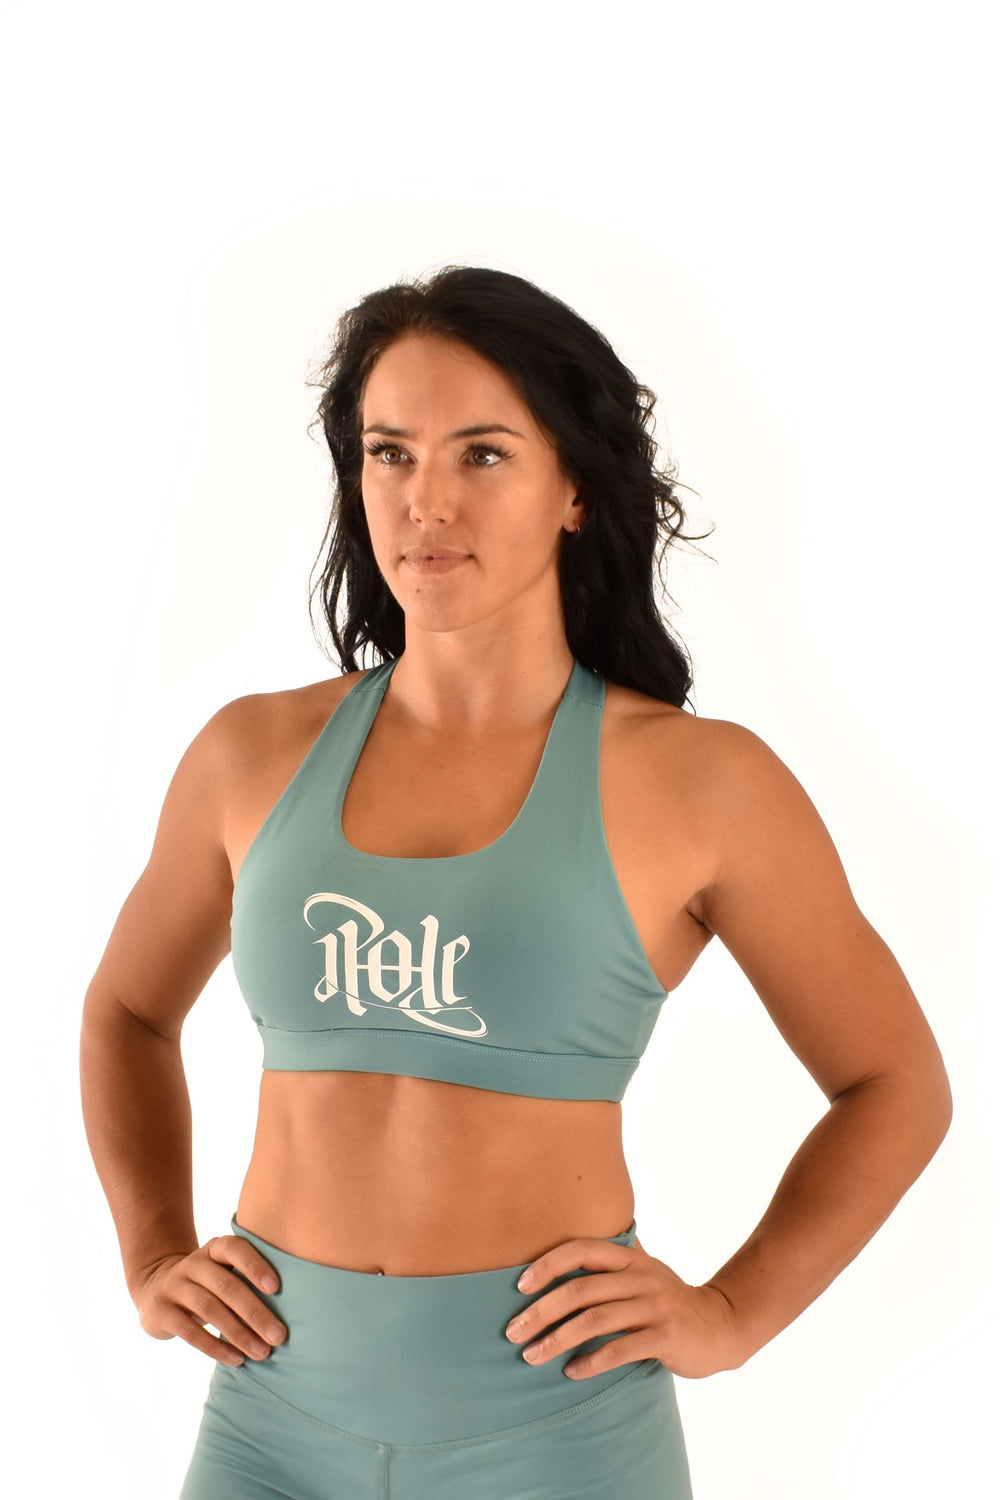 OFF THE POLE Signature Sports Bra - Teal *SIZE XL ONLY*